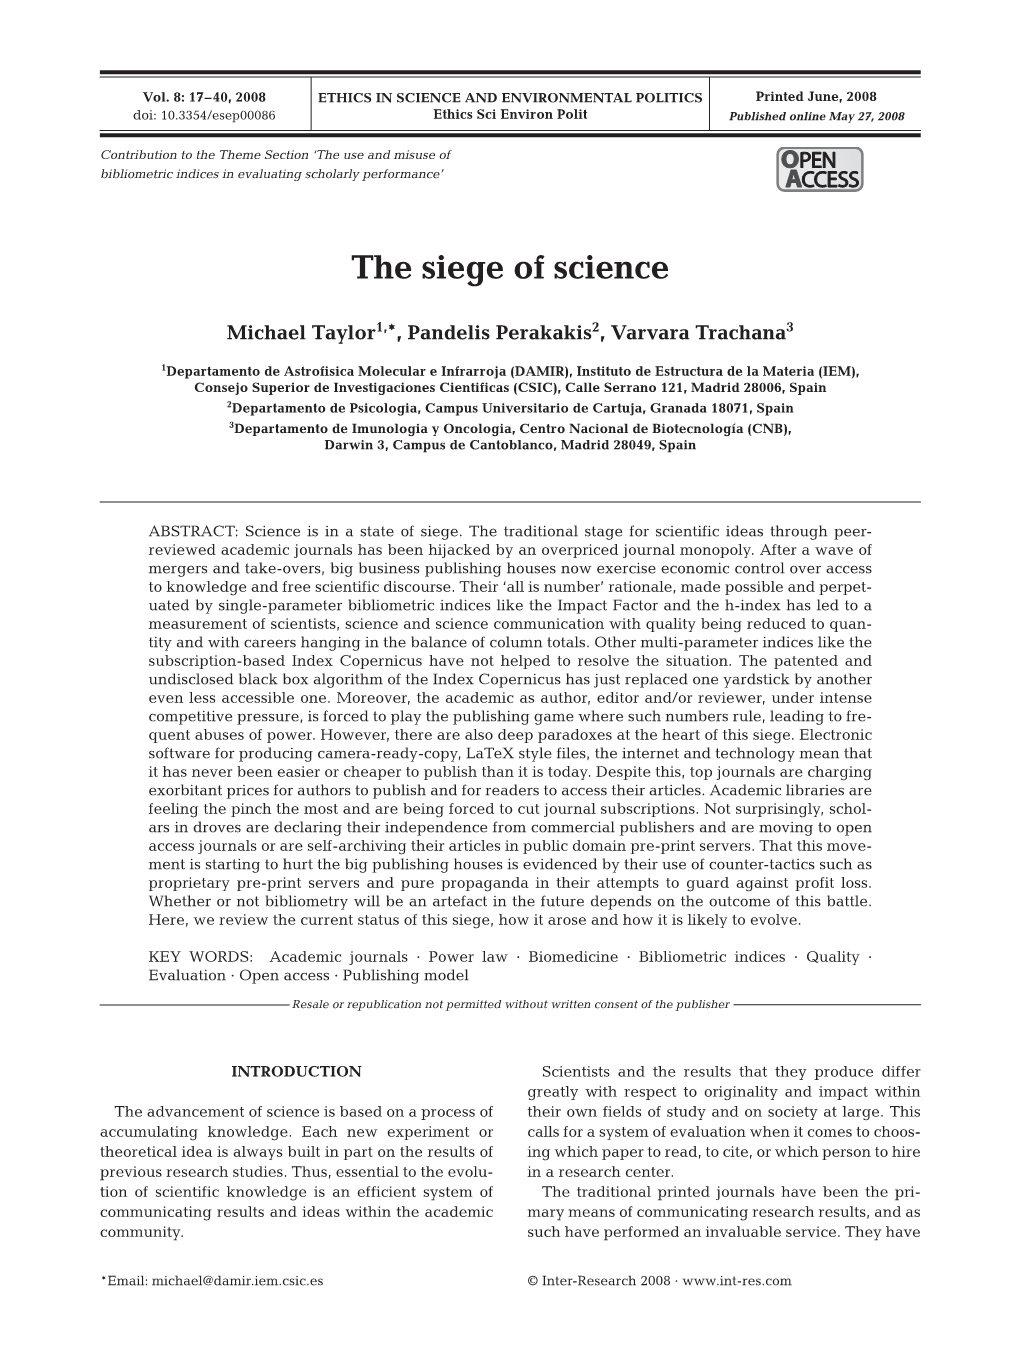 The Siege of Science